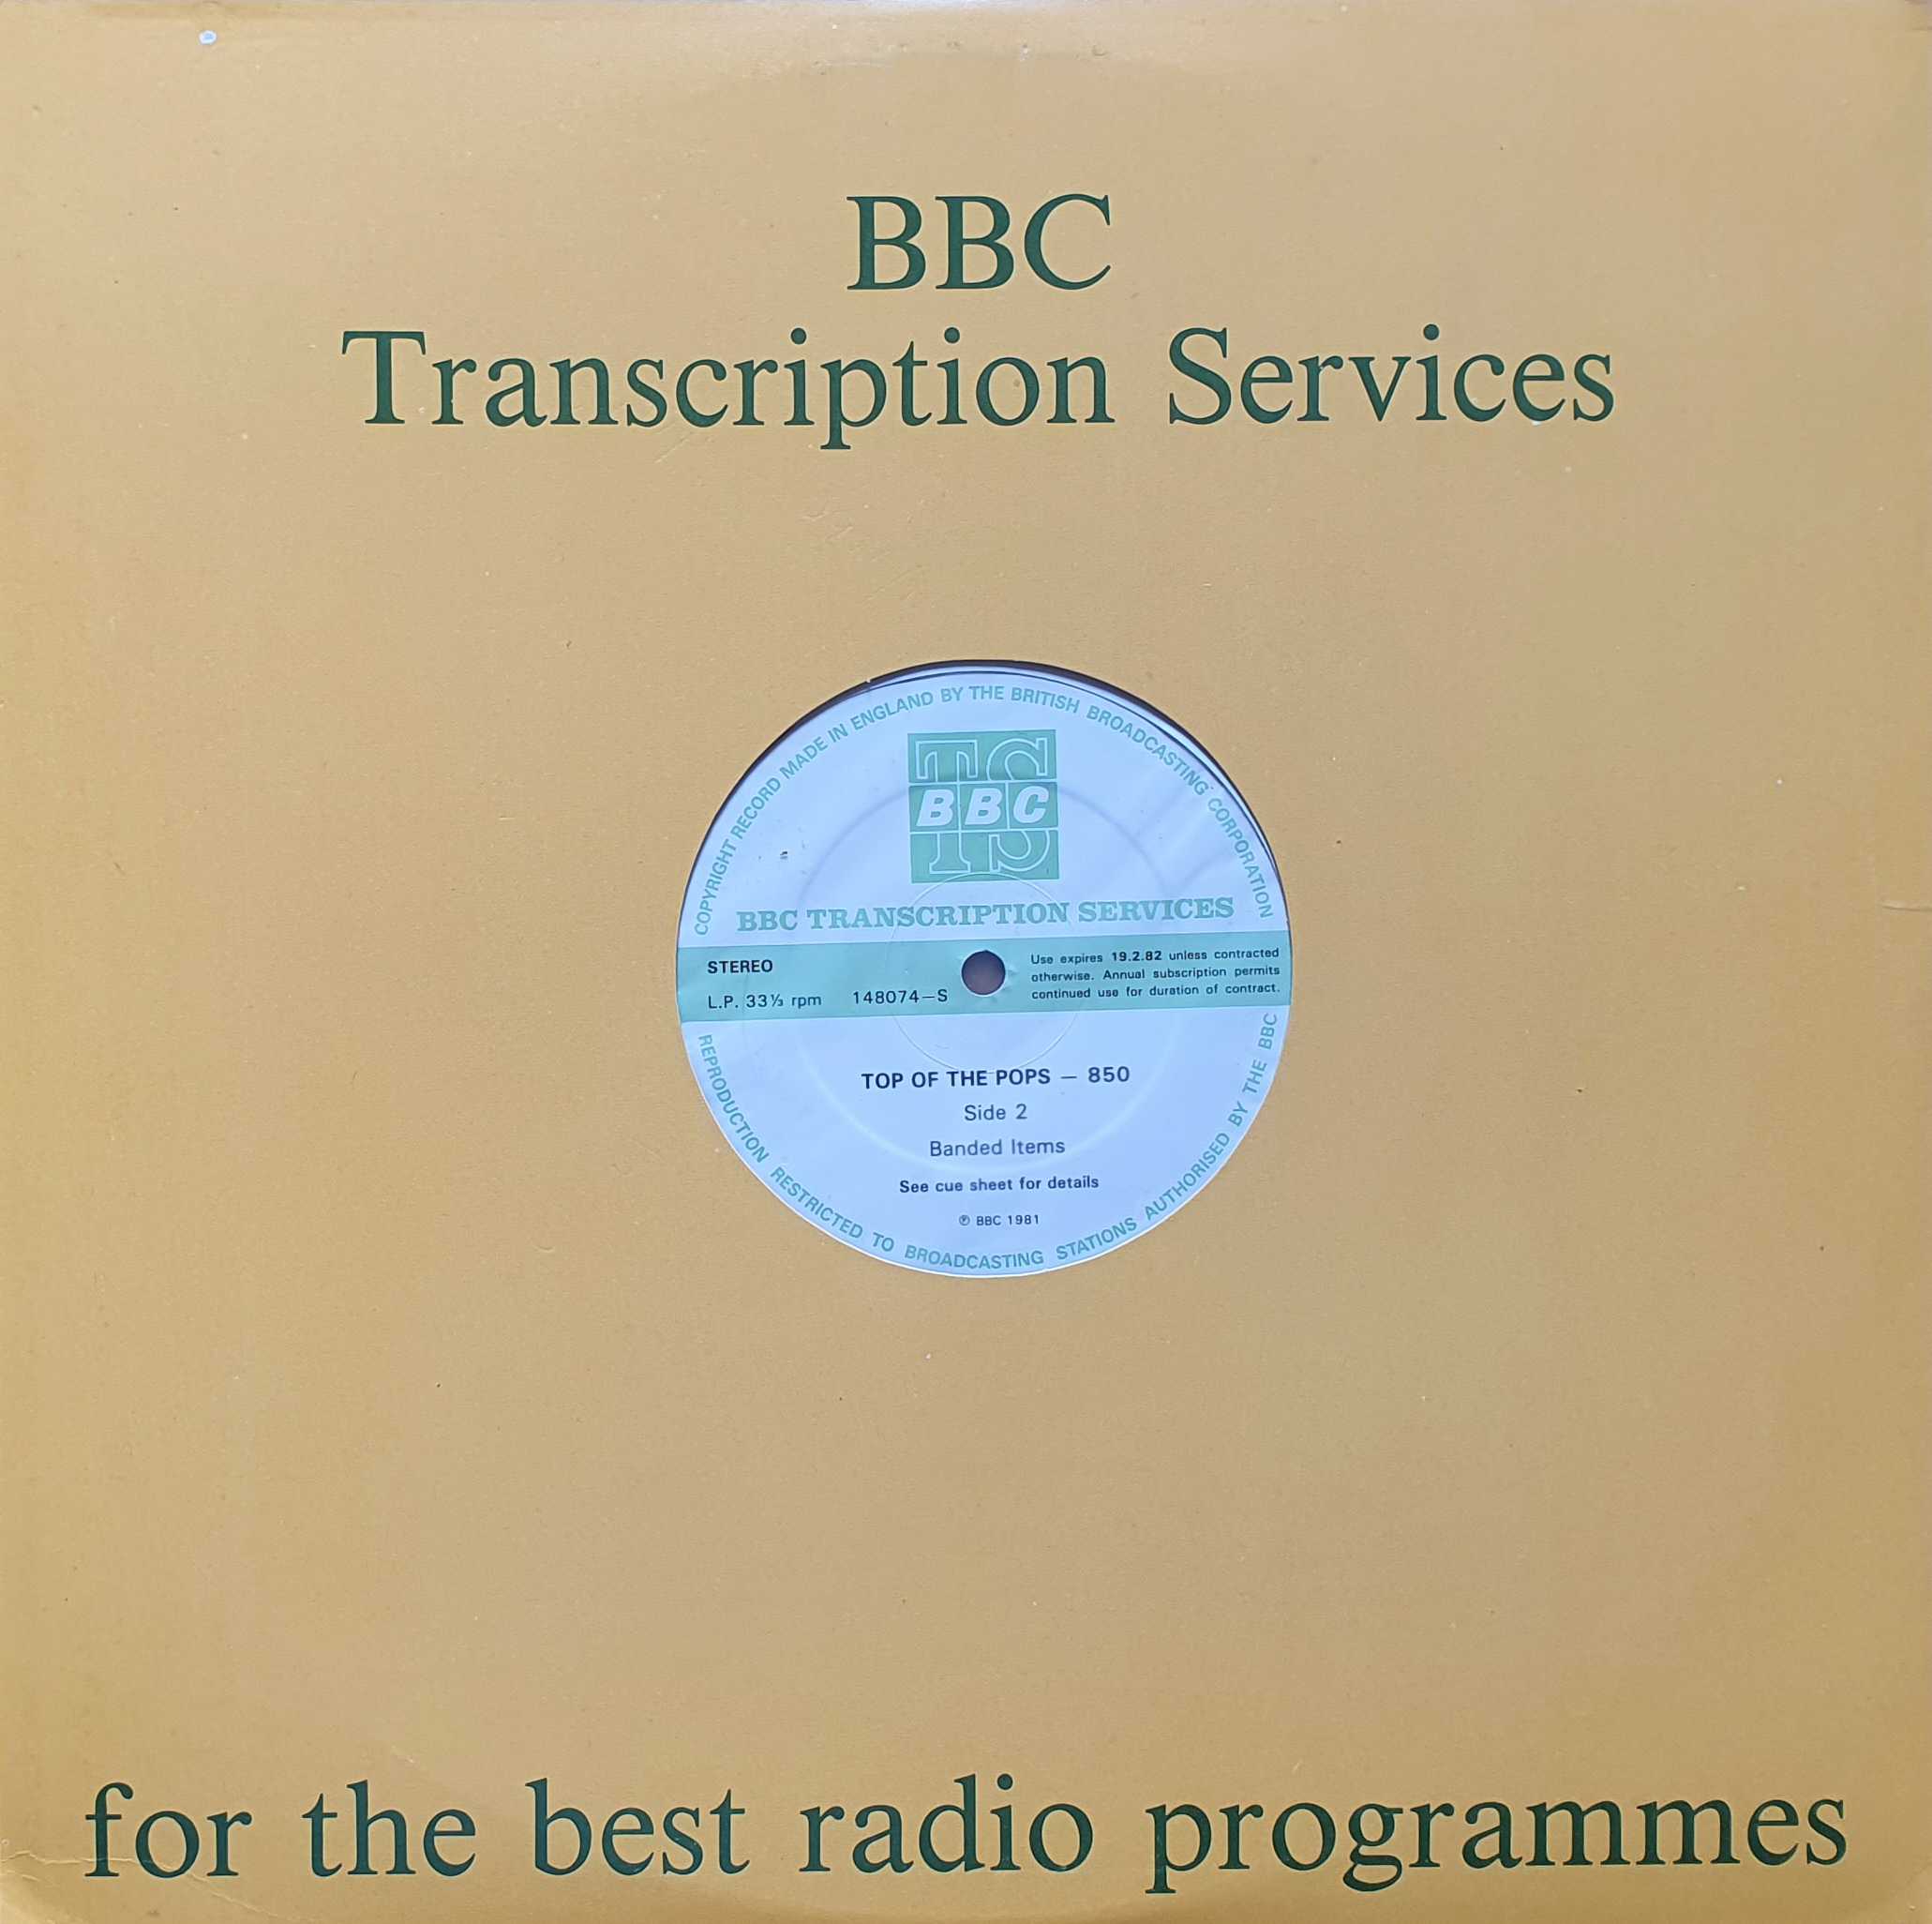 Picture of 148073 - S Top of the pops - 850 by artist Various from the BBC records and Tapes library